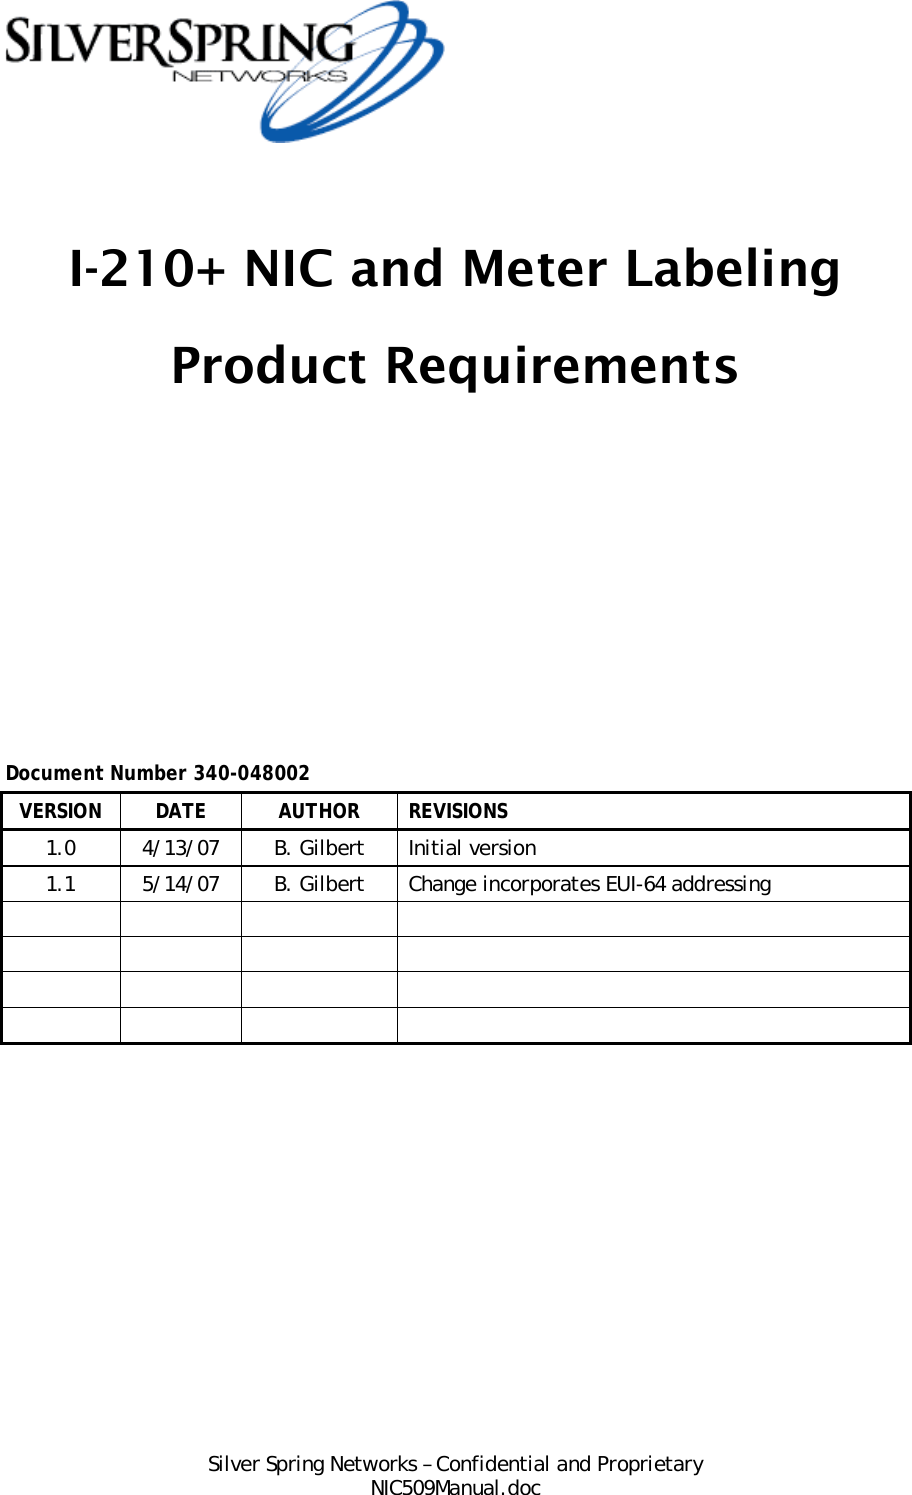  Silver Spring Networks – Confidential and Proprietary NIC509Manual.doc  I-210+ NIC and Meter Labeling Product Requirements                Document Number 340-048002 VERSION DATE  AUTHOR REVISIONS 1.0  4/13/07  B. Gilbert  Initial version 1.1  5/14/07  B. Gilbert  Change incorporates EUI-64 addressing                      